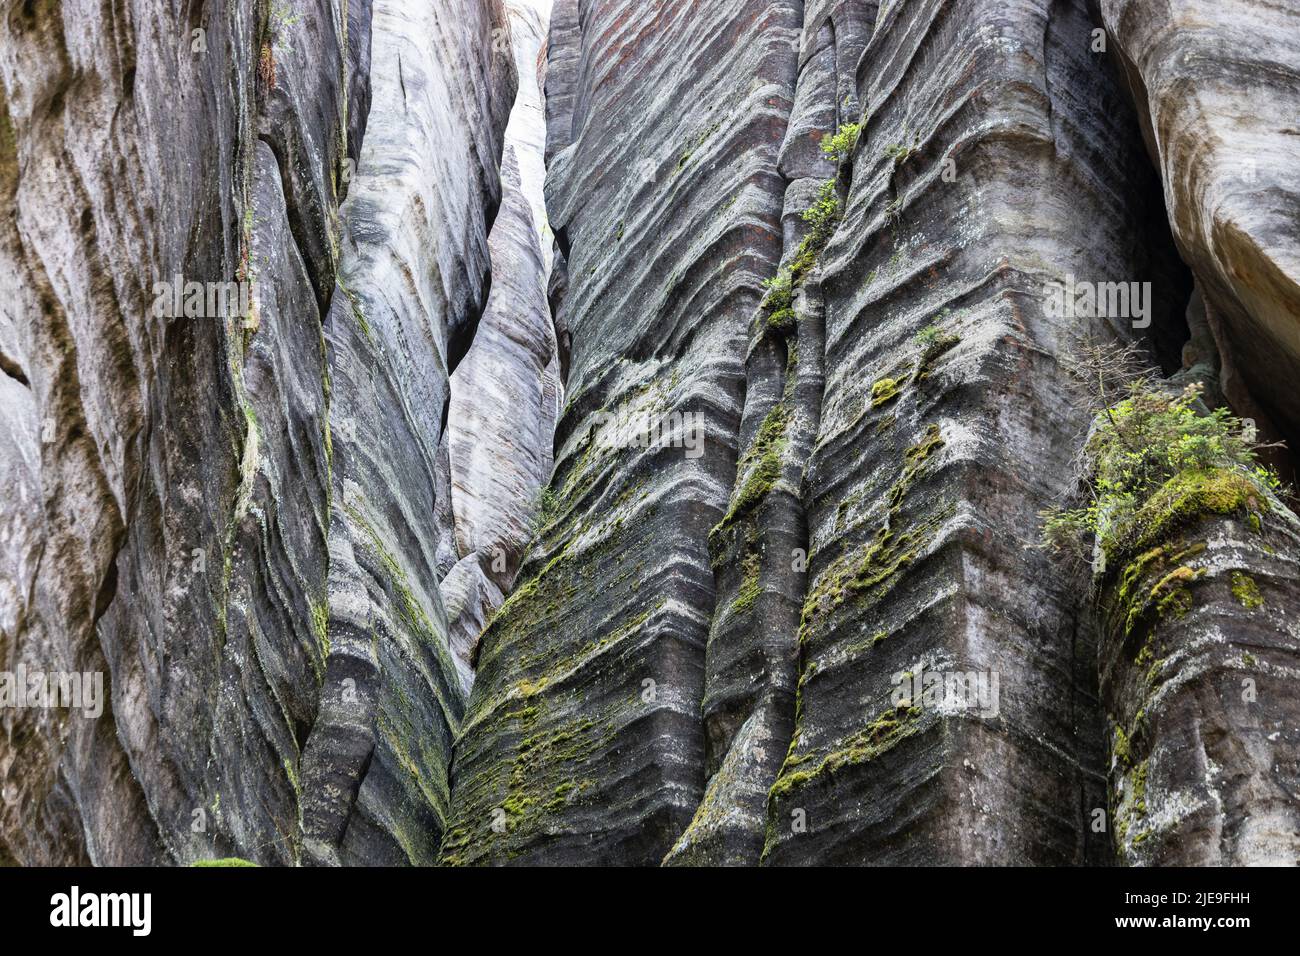 Rock towers and walls in the Adrspach-Teplice Rocks Nature Reserve, Czech Republic Stock Photo